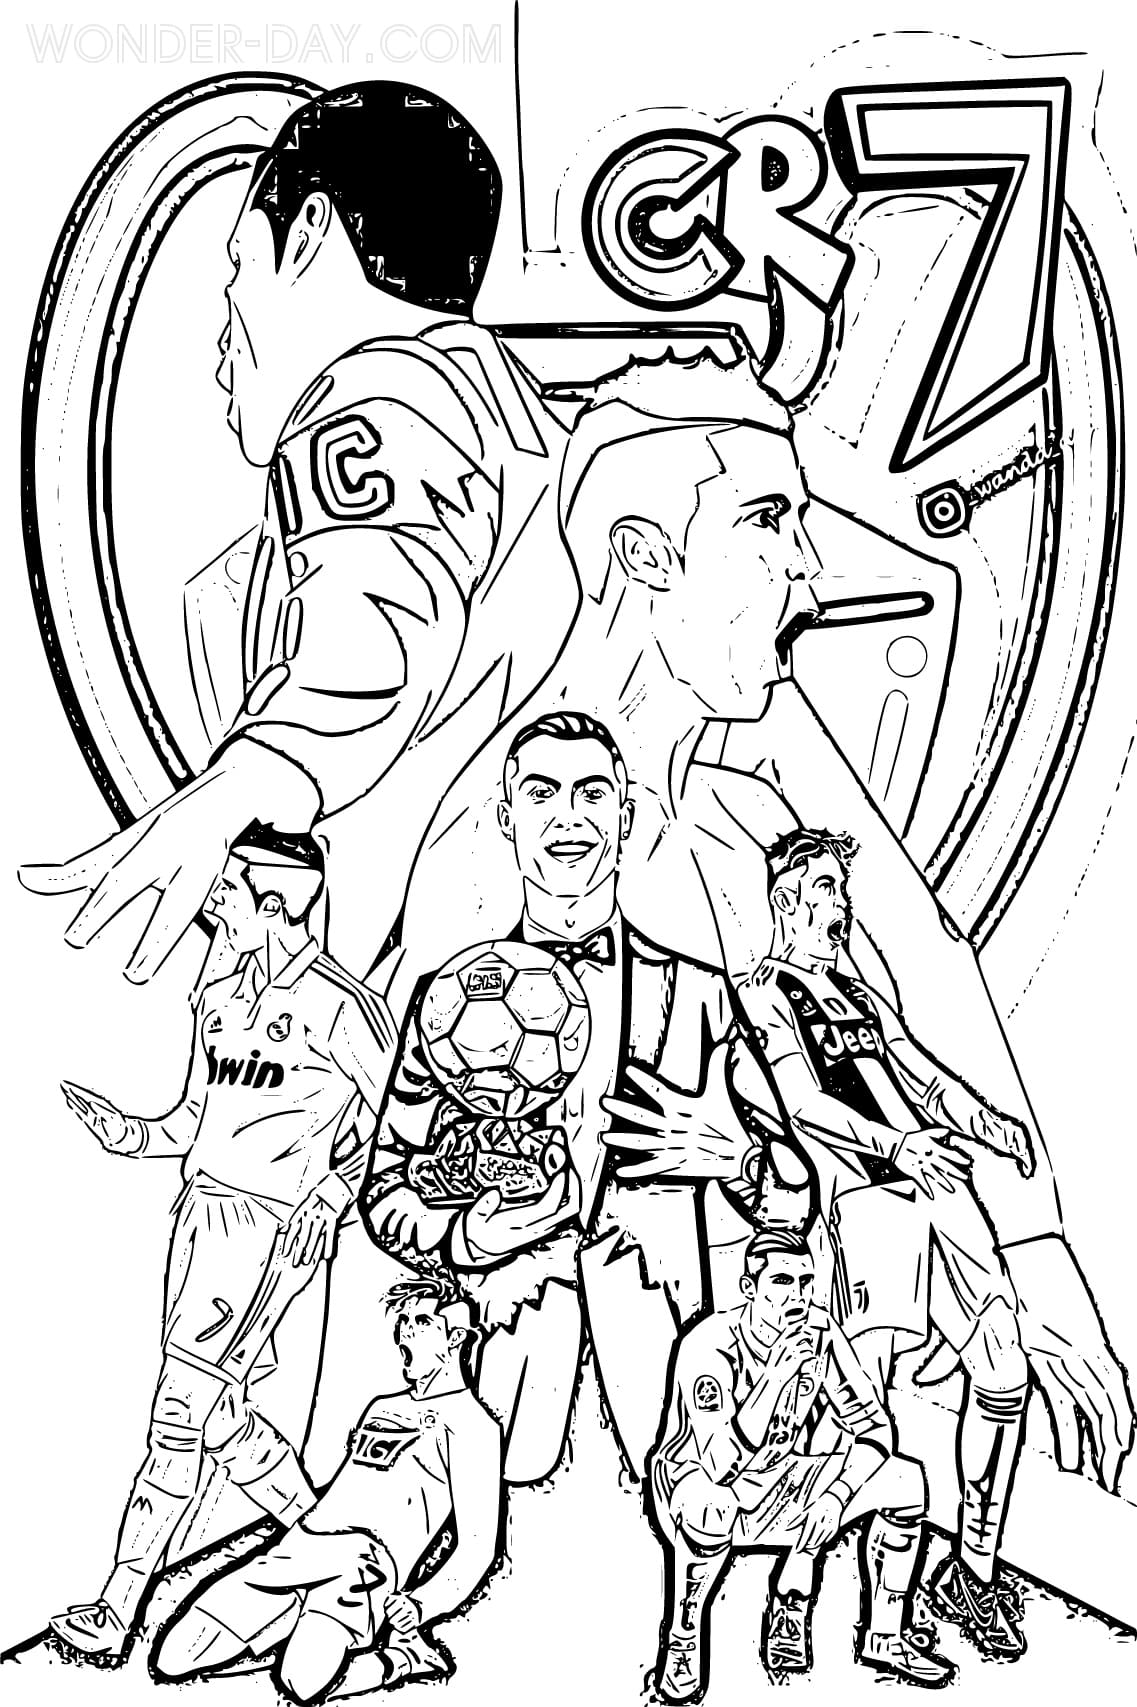 Cristiano Ronaldo Coloring Pages | WONDER DAY — Coloring pages for children  and adults